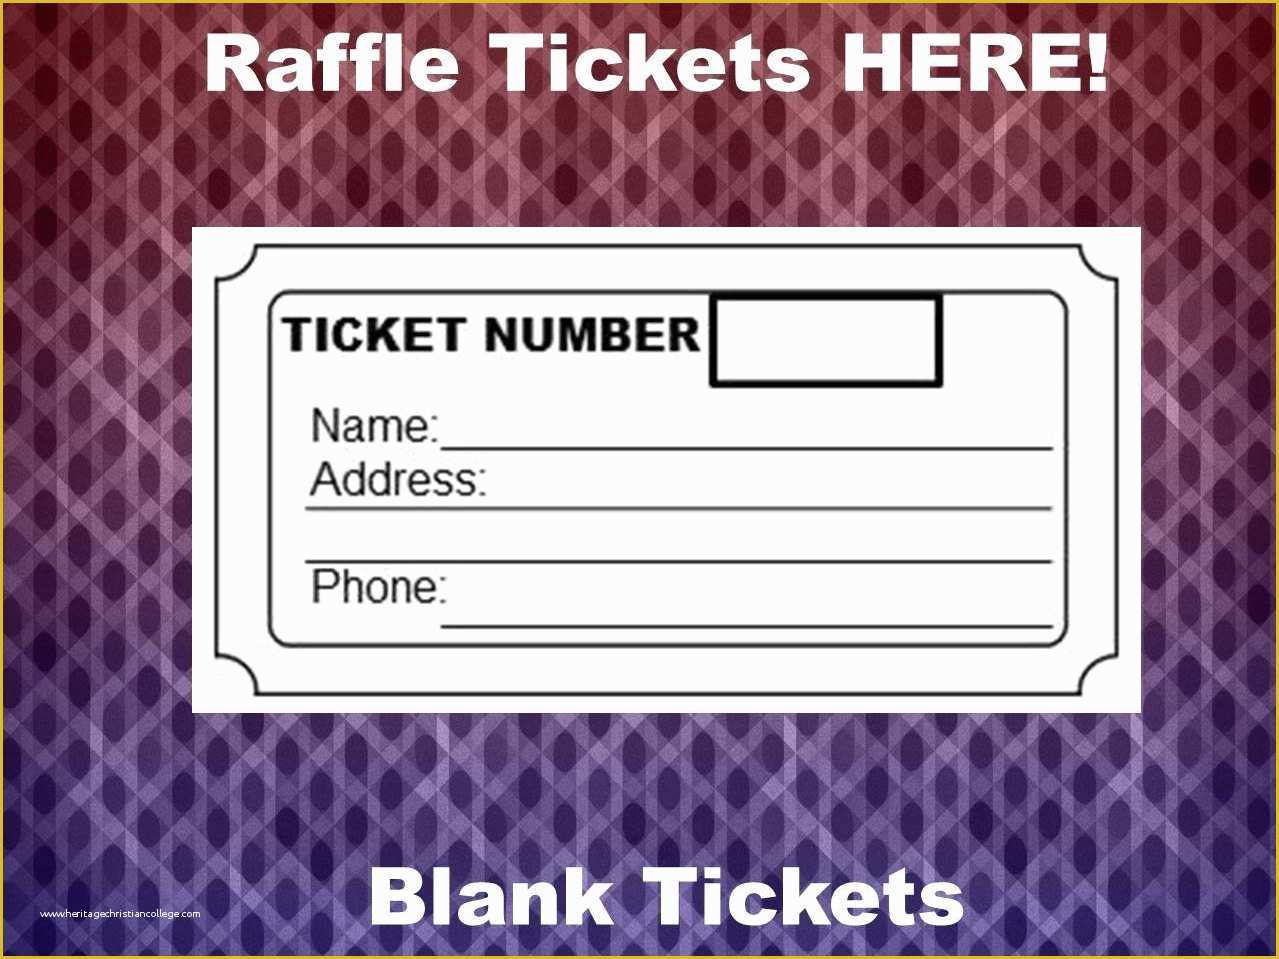 Free Ticket Templates 8 Per Page Of Raffle Ticket Template 8 Blank Raffle Tickets Per Page Party